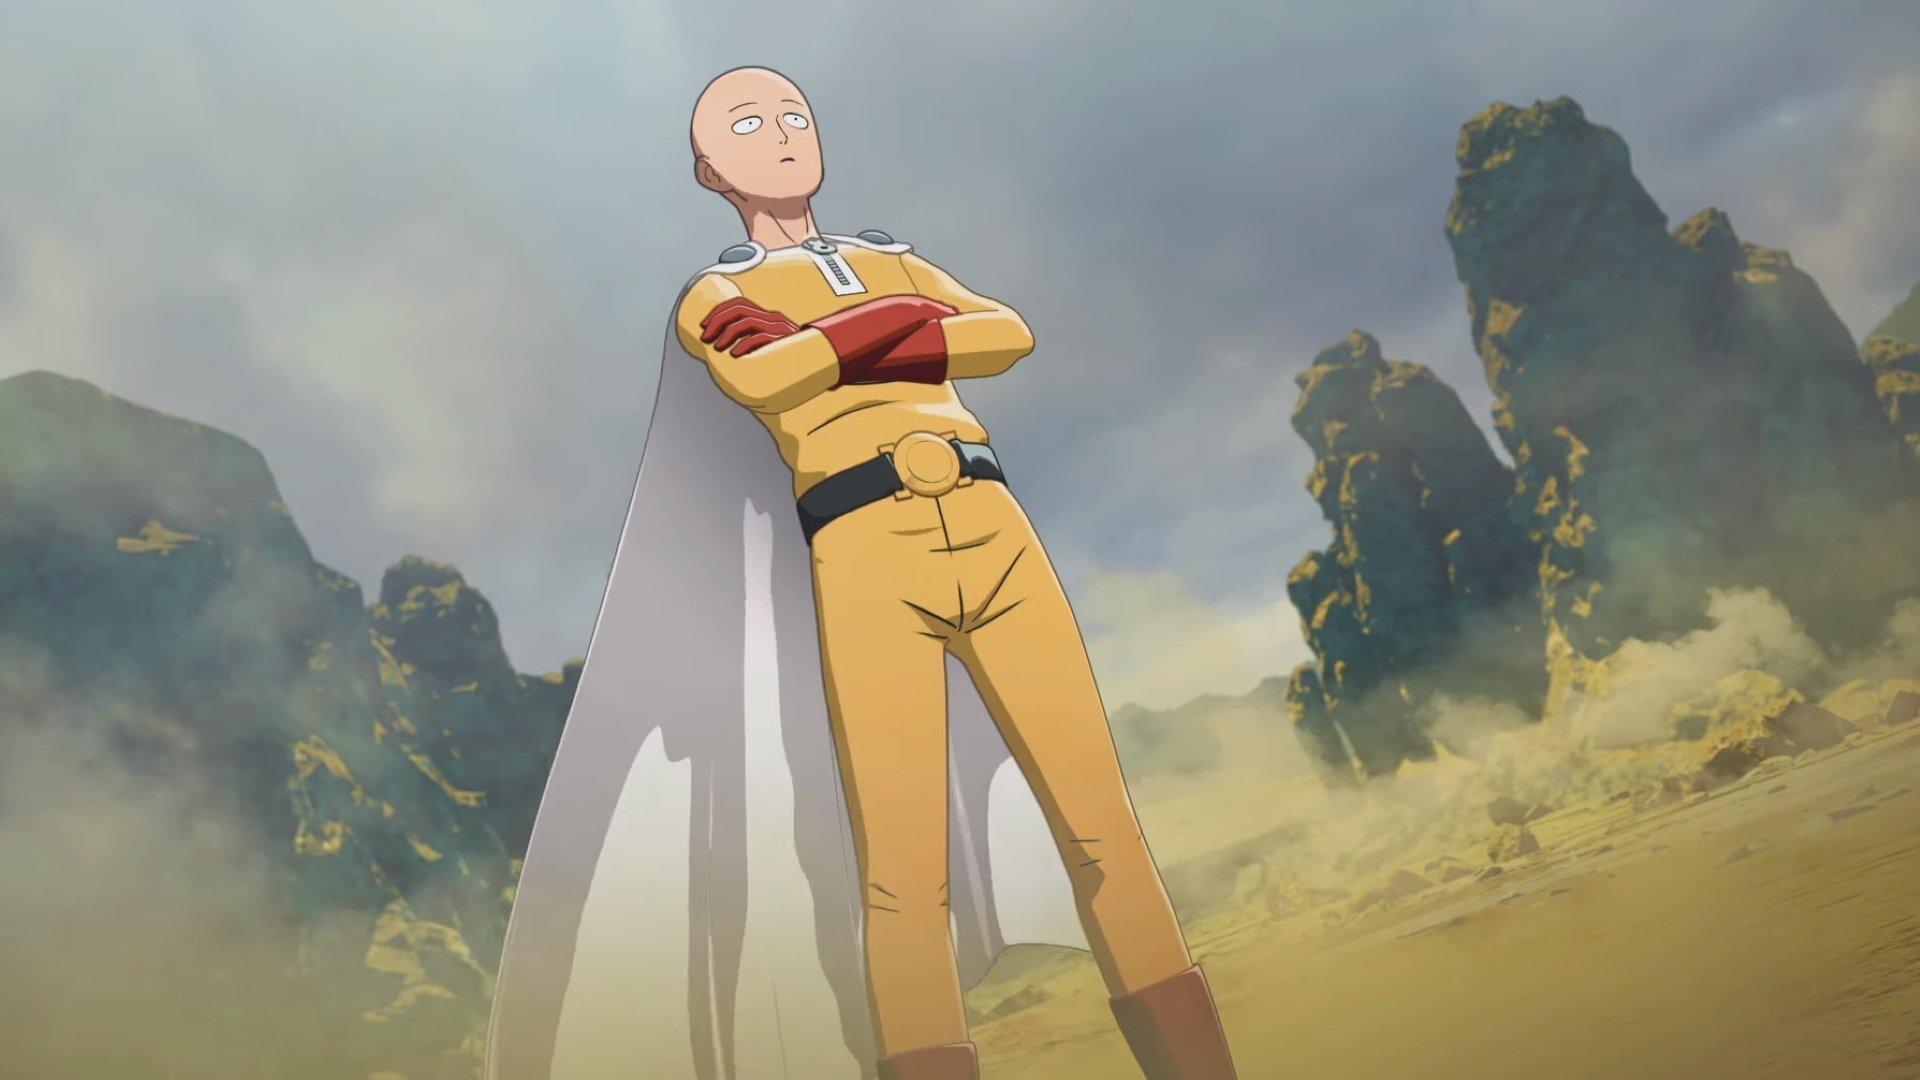 one punch man action